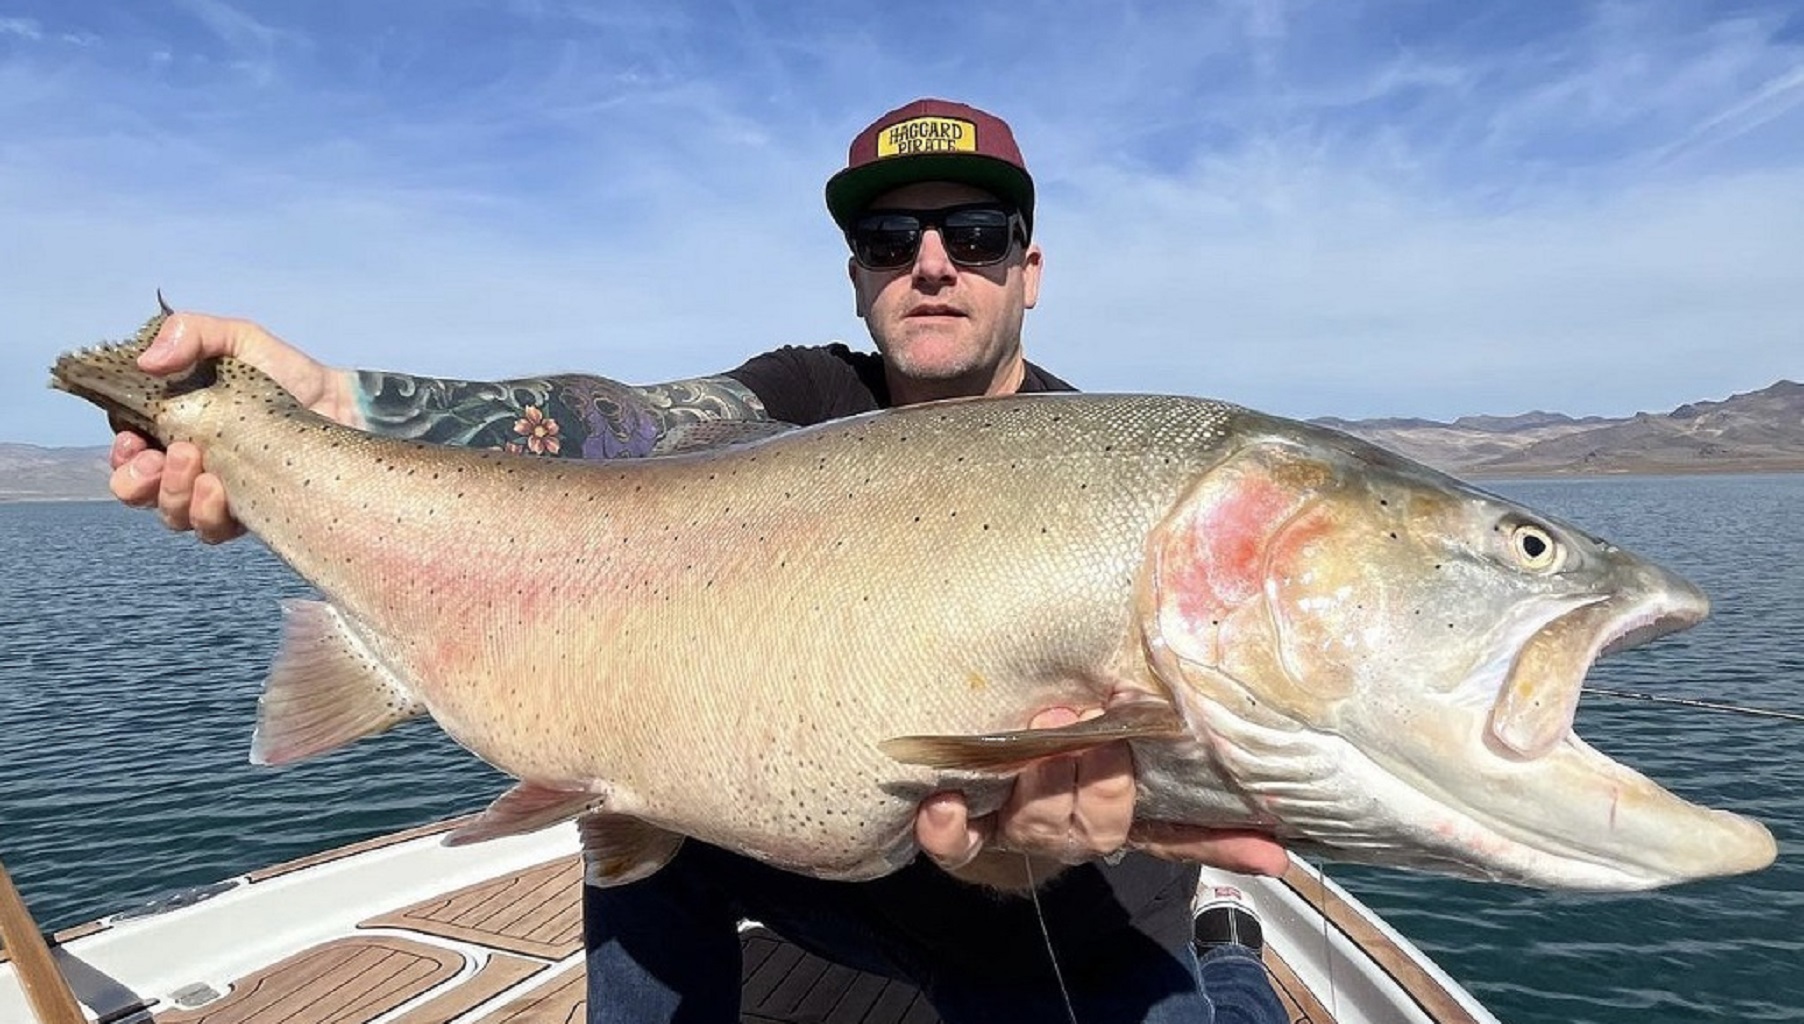 Fly Fishing Pyramid Lake - 20 LBS Lahontan Cutthroat Trout to the Boat